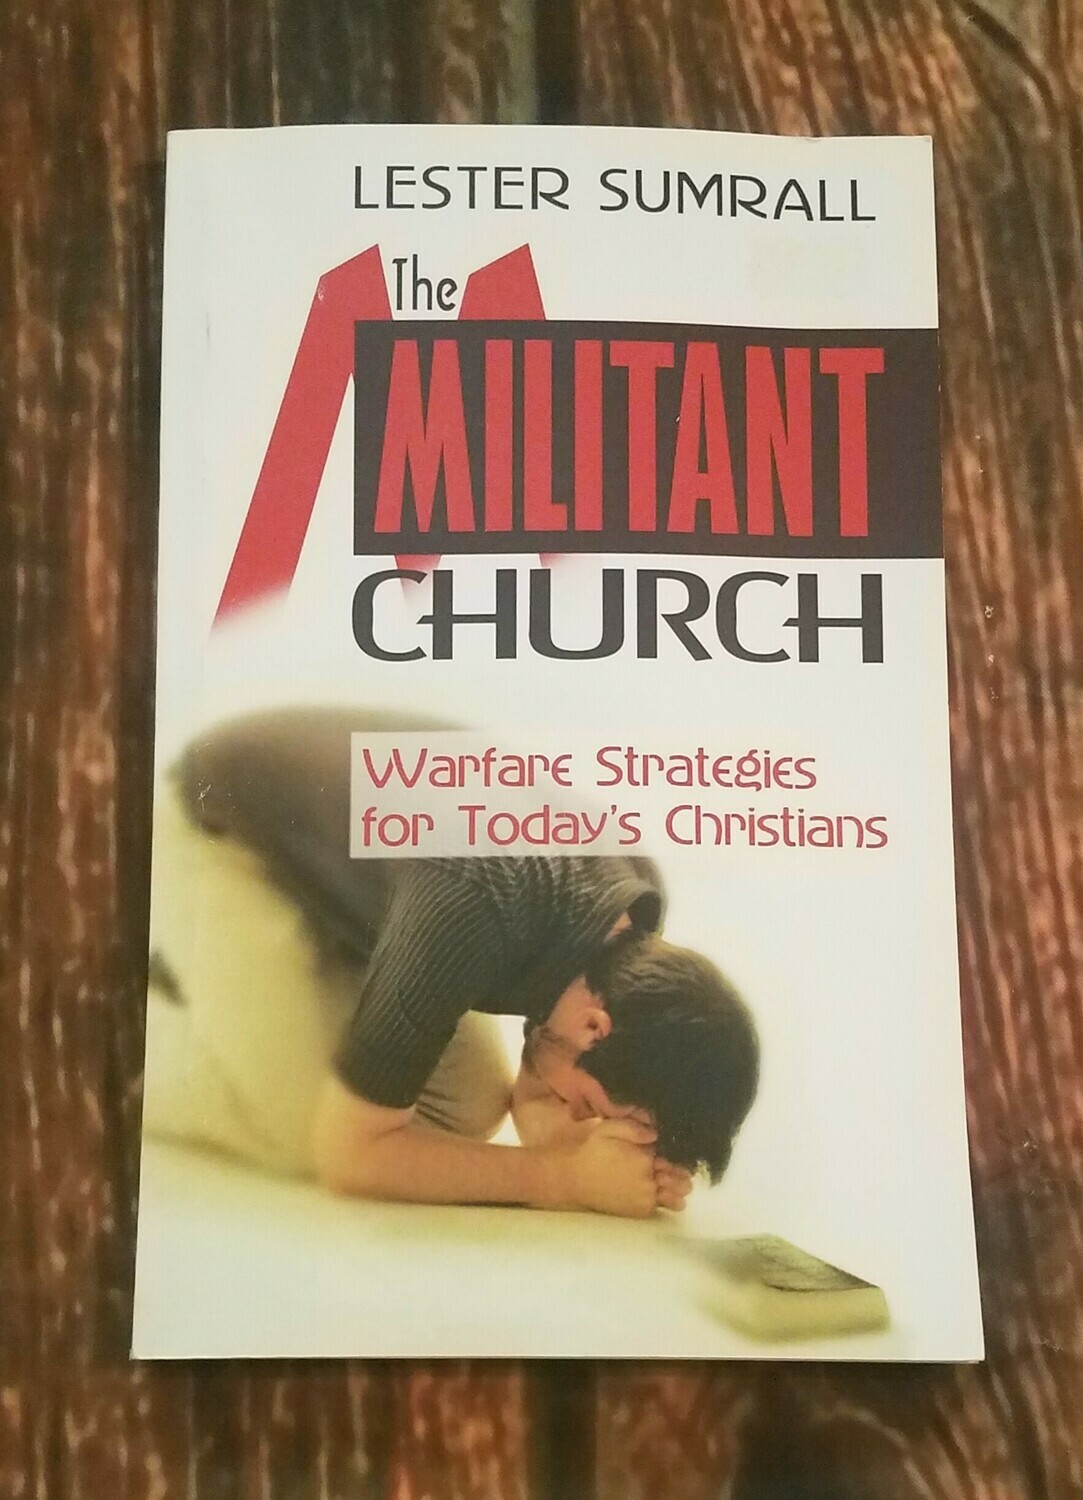 The Militant Church by Lester Sumrall